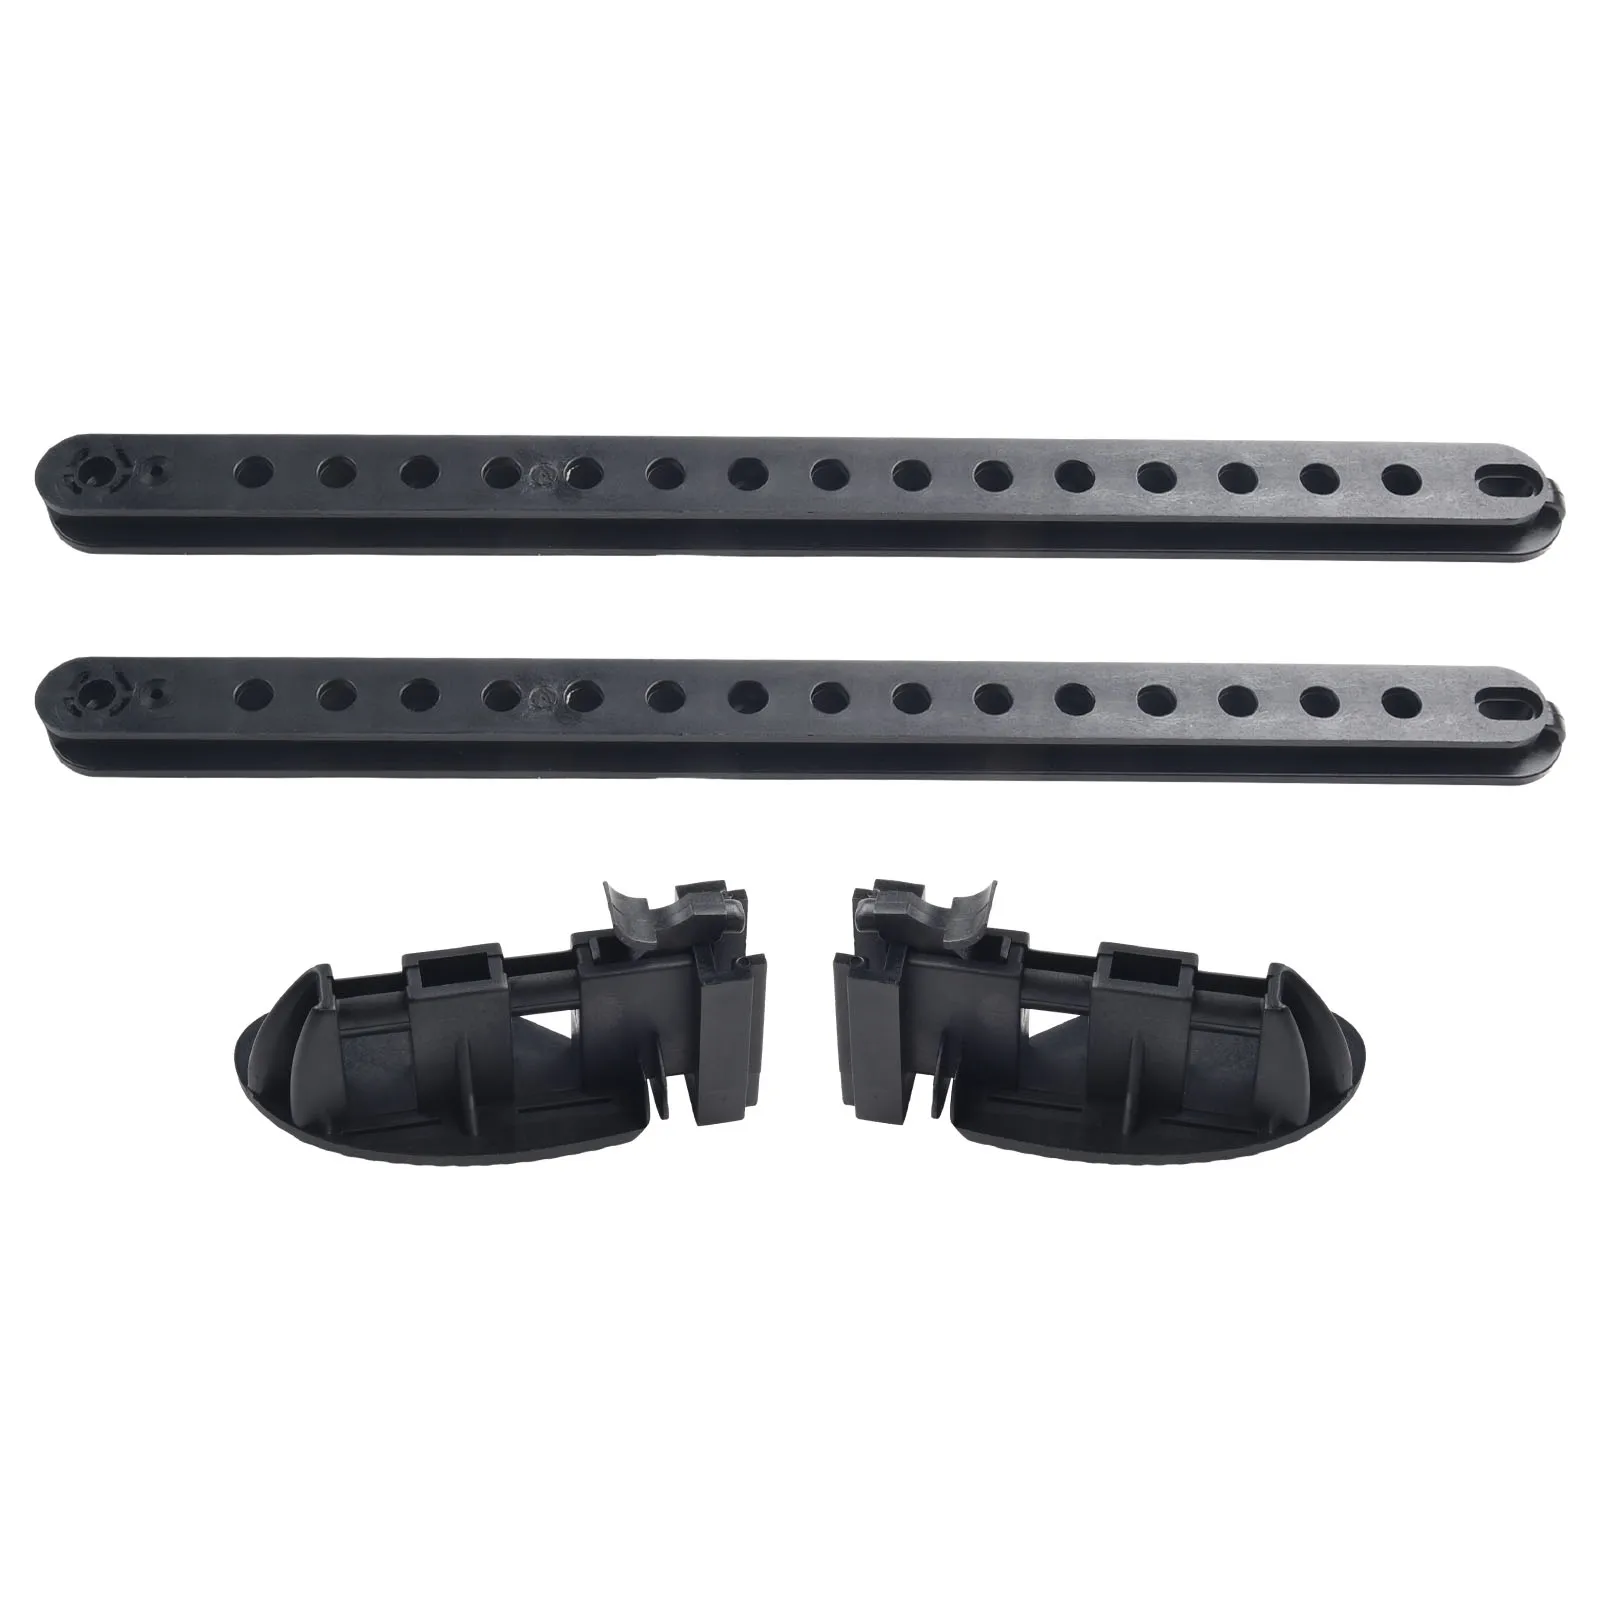 

Brace Pedal Foot 1pair 41.5 Cm / 16.3 Inches Accessories Adjustable Canoe Foot Peg Rest High Quality Kayak Plastic